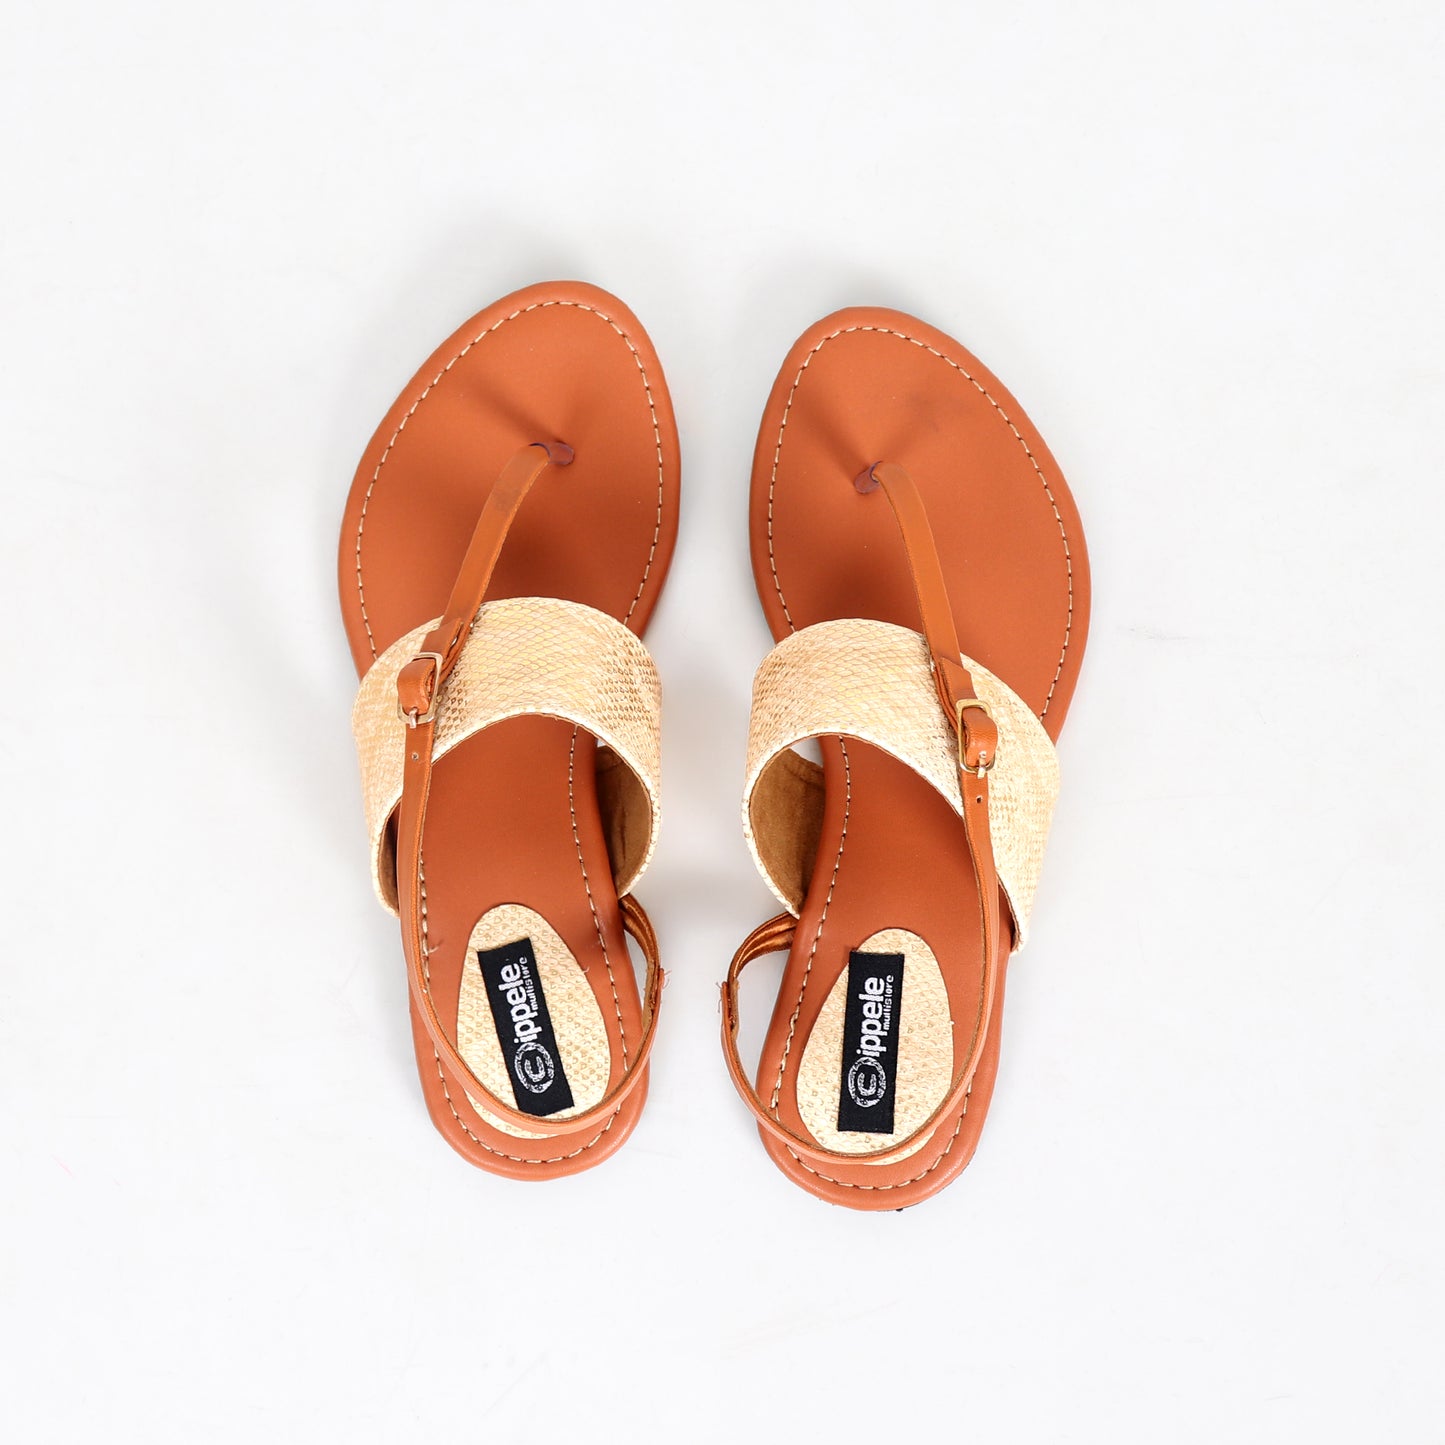 Foot Wear,Something Fashionable Sandals - Cippele Multi Store